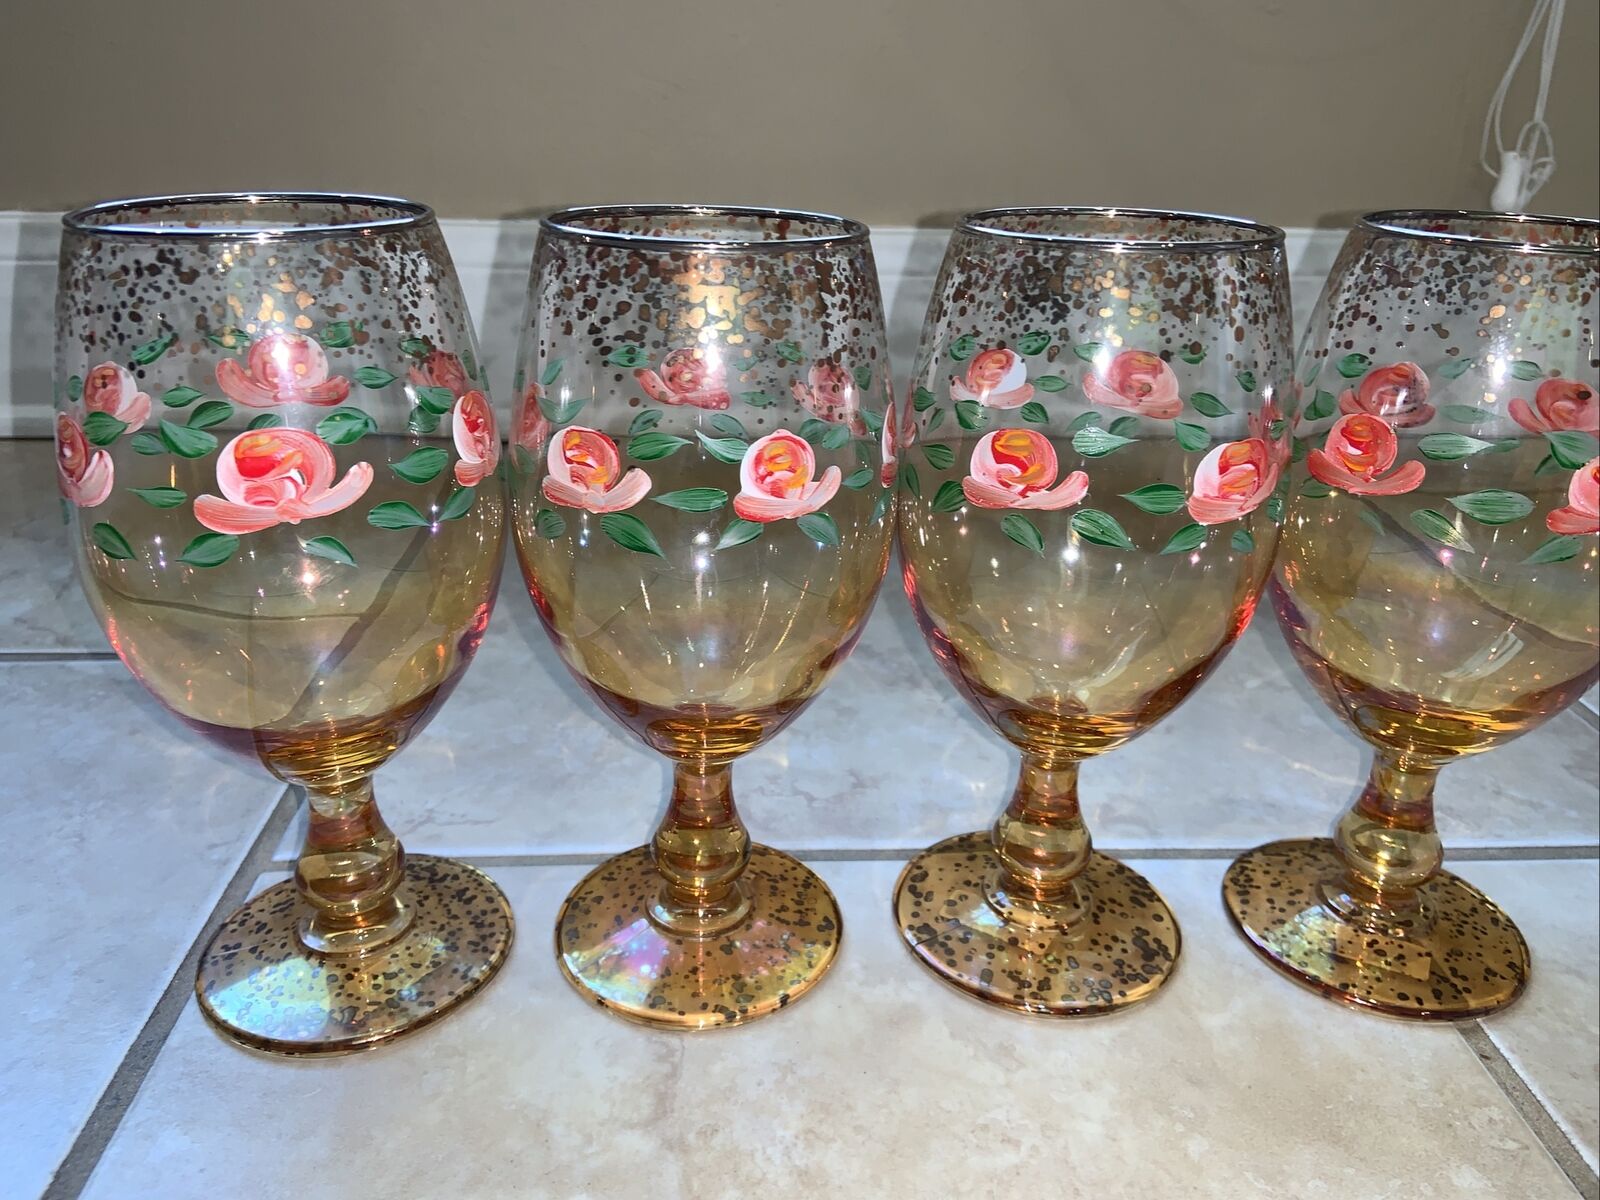 NWT NEIMAN MARCUS Made In Italy Hand Painted Amber Floral 24 k Gold Glassware